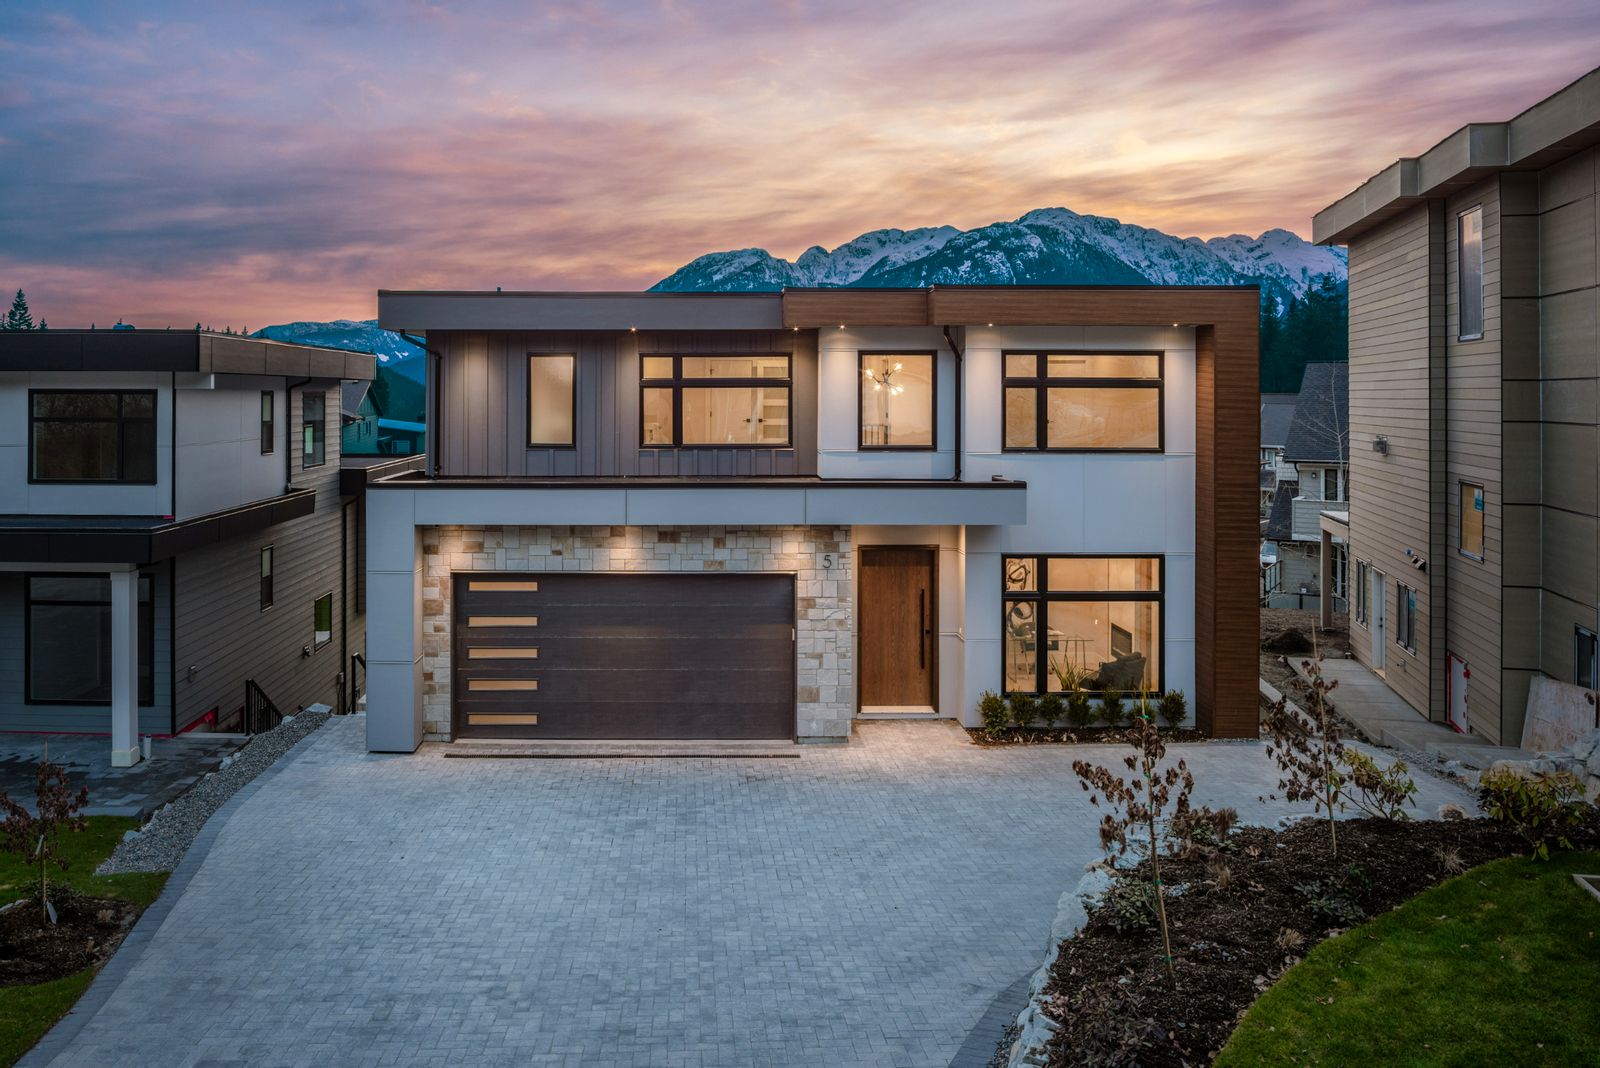 New property listed in University Highlands, Squamish